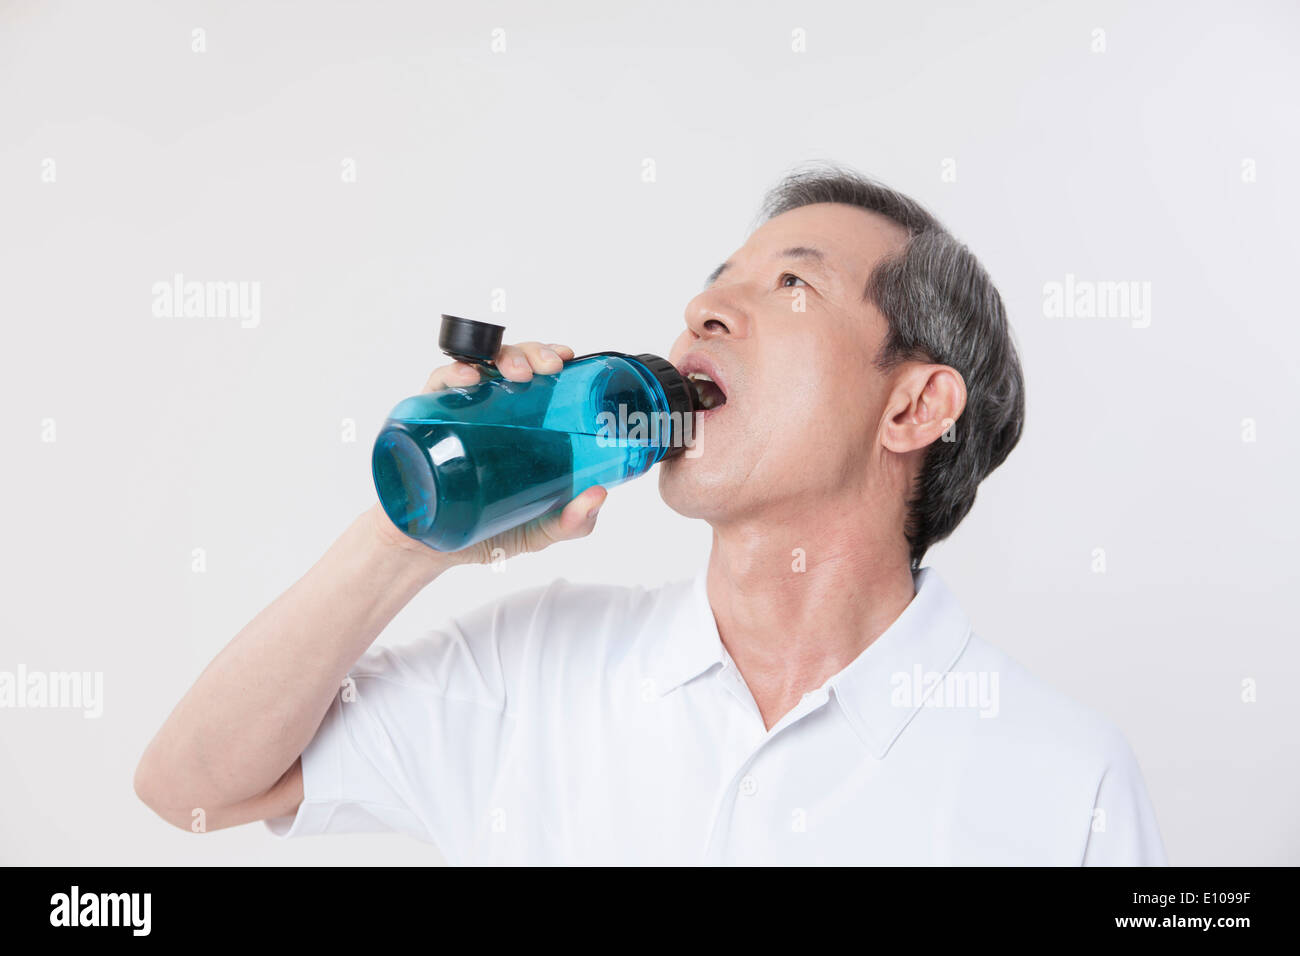 Picture of drunk man with mineral water bottles placed around him in Japan  goes viral - Dimsum Daily